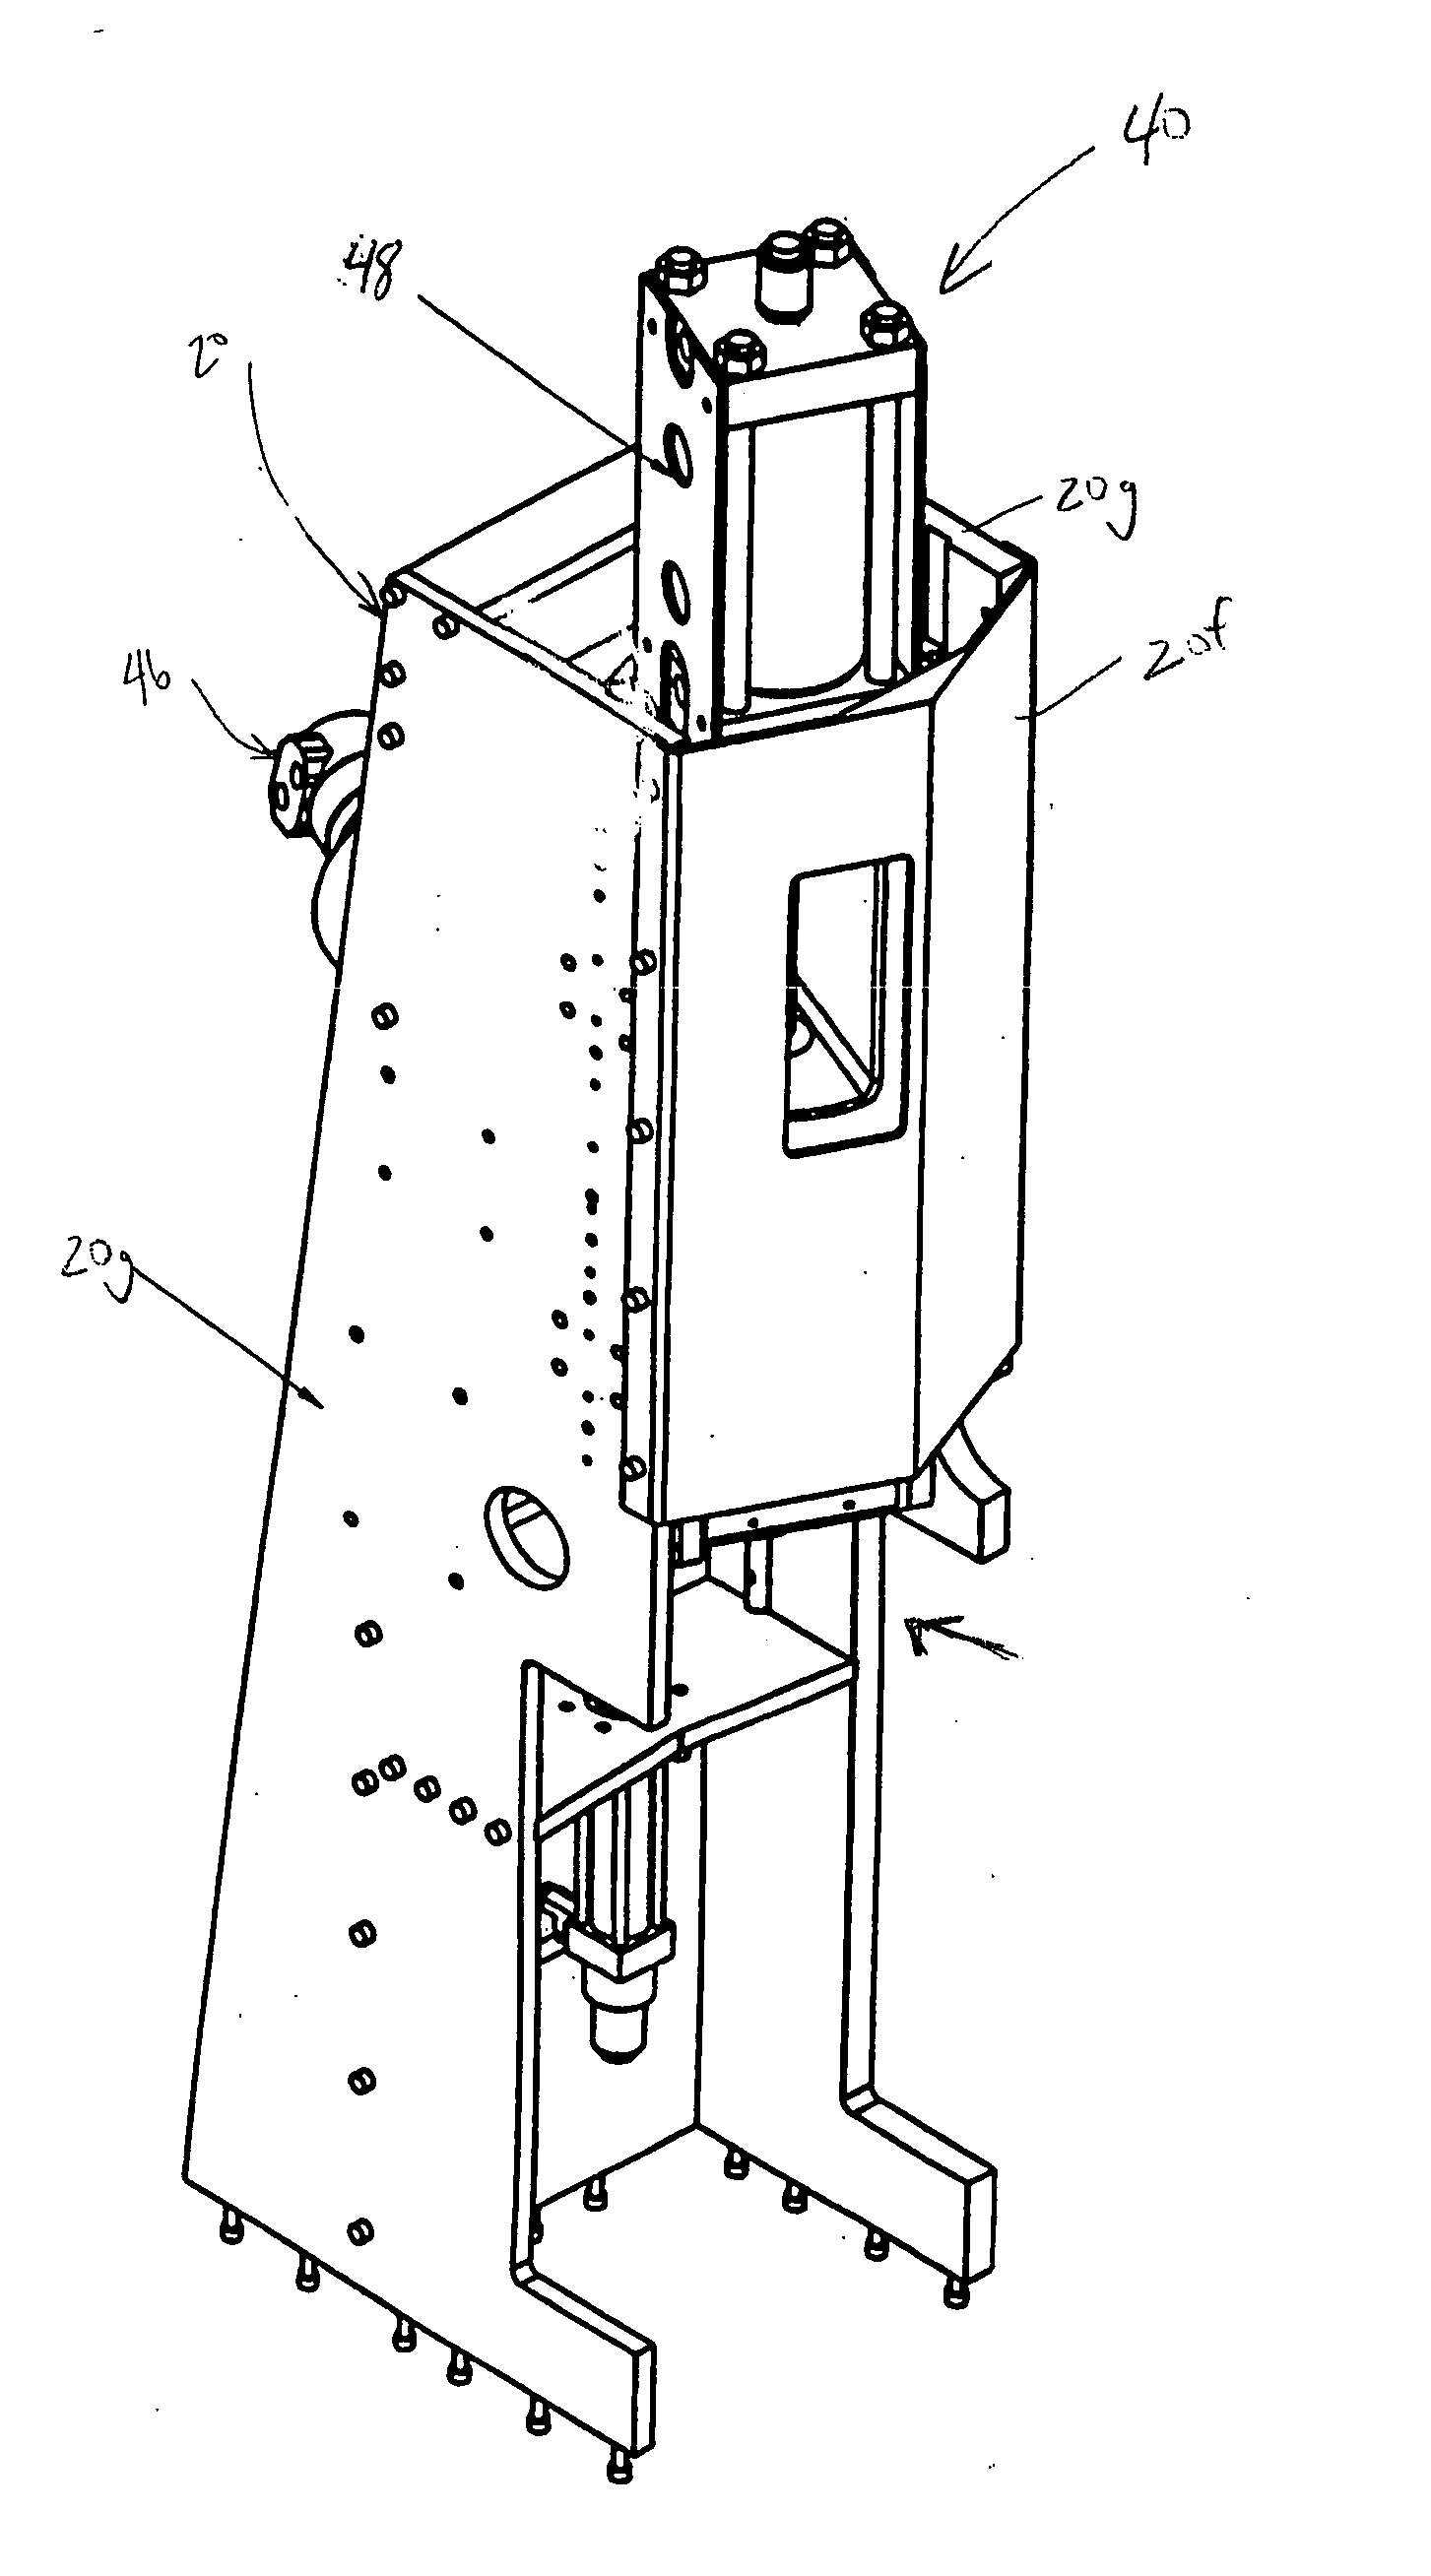 Rotary injection molding apparatus and method for use